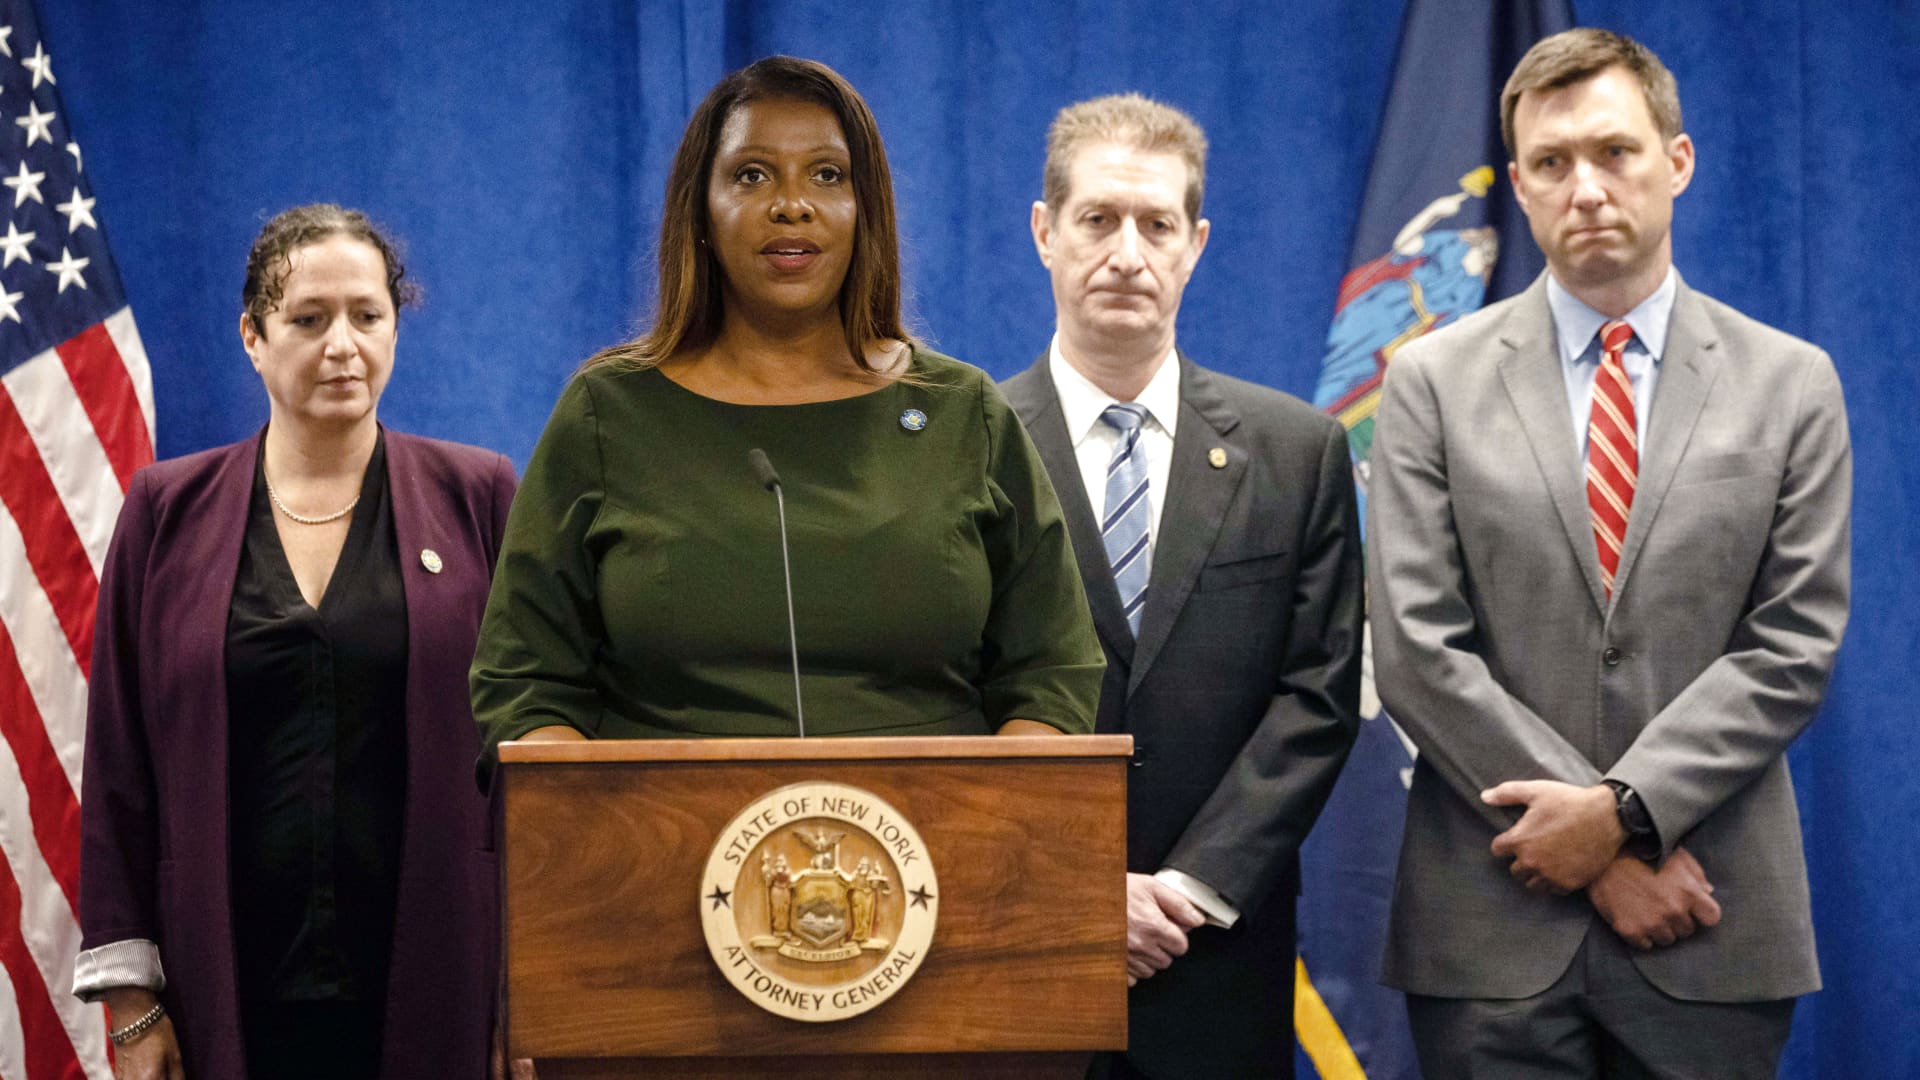 New York Legal professional Normal Letitia James says Trump dedicated crimes, asks federal prosecutors and IRS to analyze